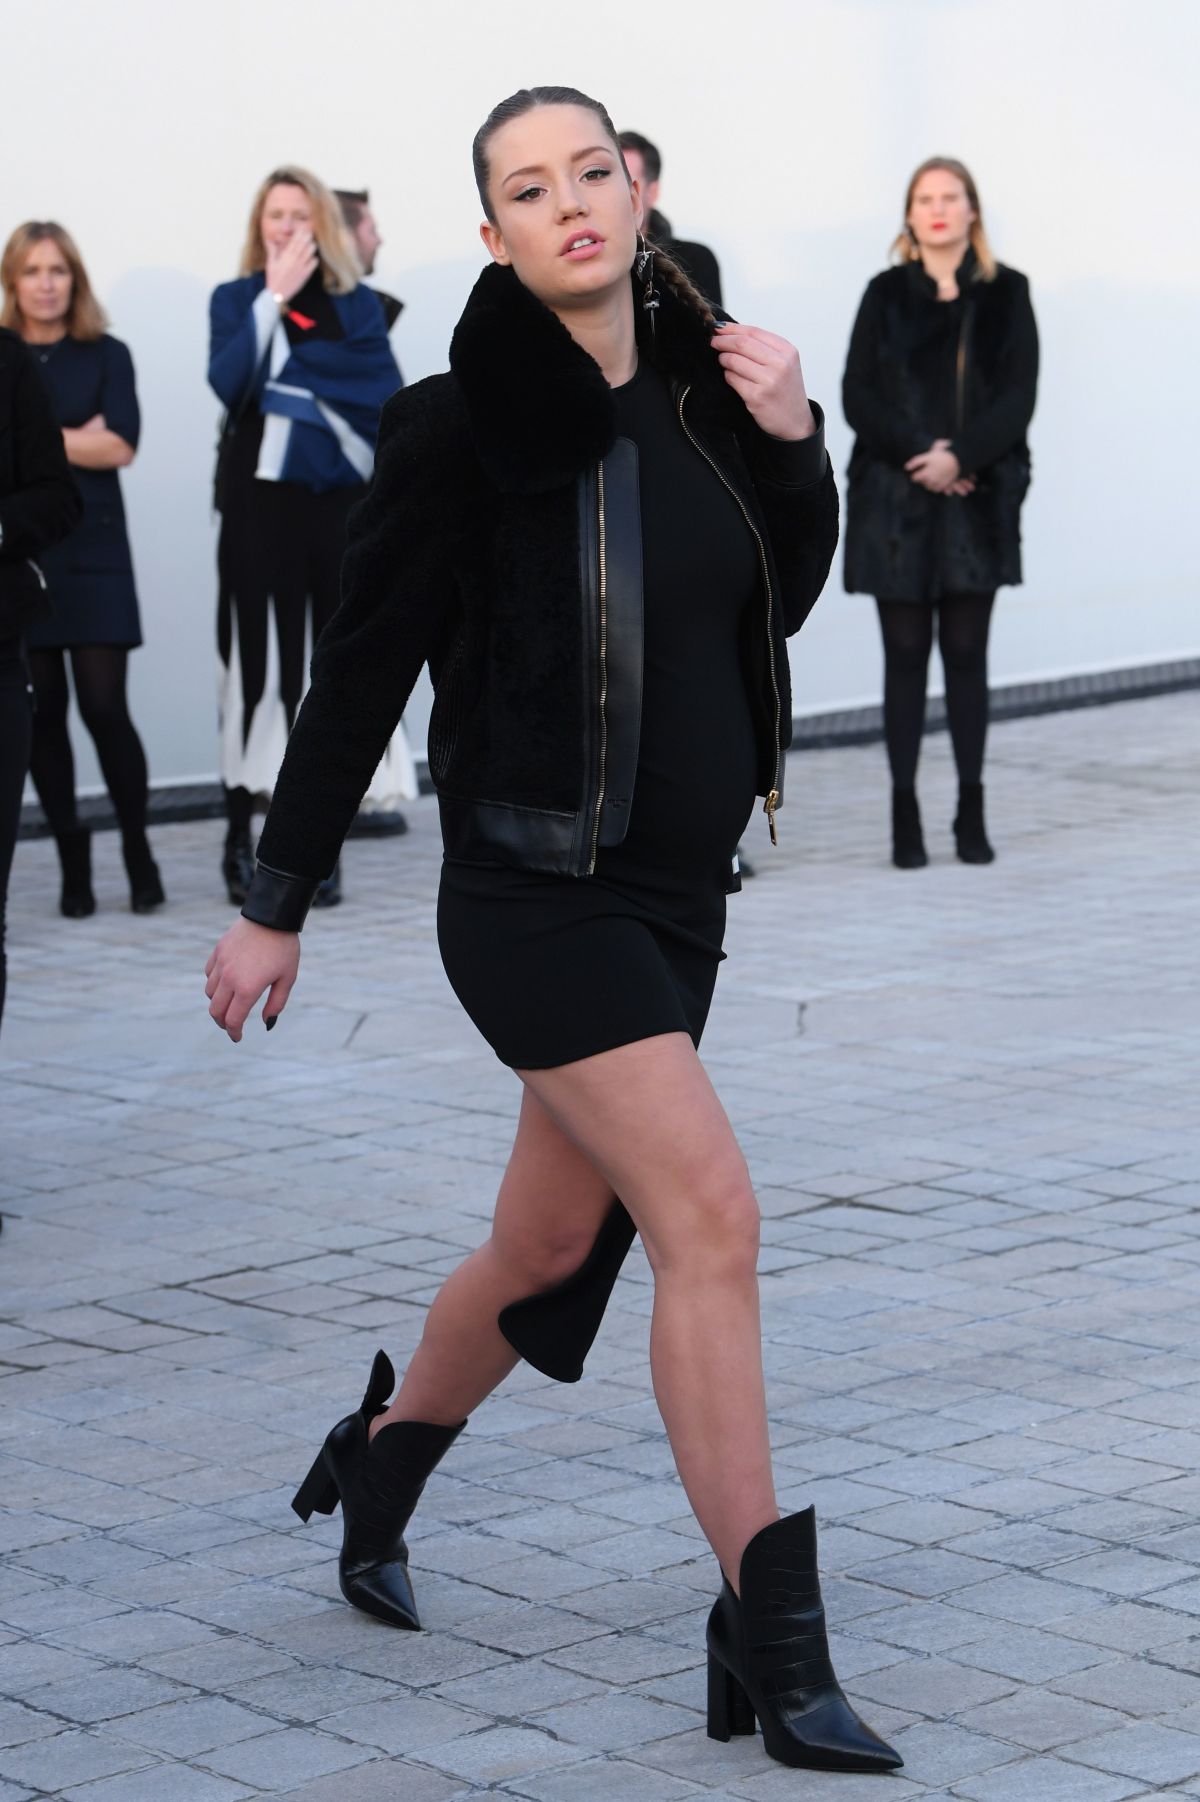 Adele Exarchopoulos (pregnant) attending the photocall held before the Louis  Vuitton show during Paris Fashion Week Ready to wear FallWinter 2017-18 on  March 07, 2017 at the Louvre museum in Paris, France.